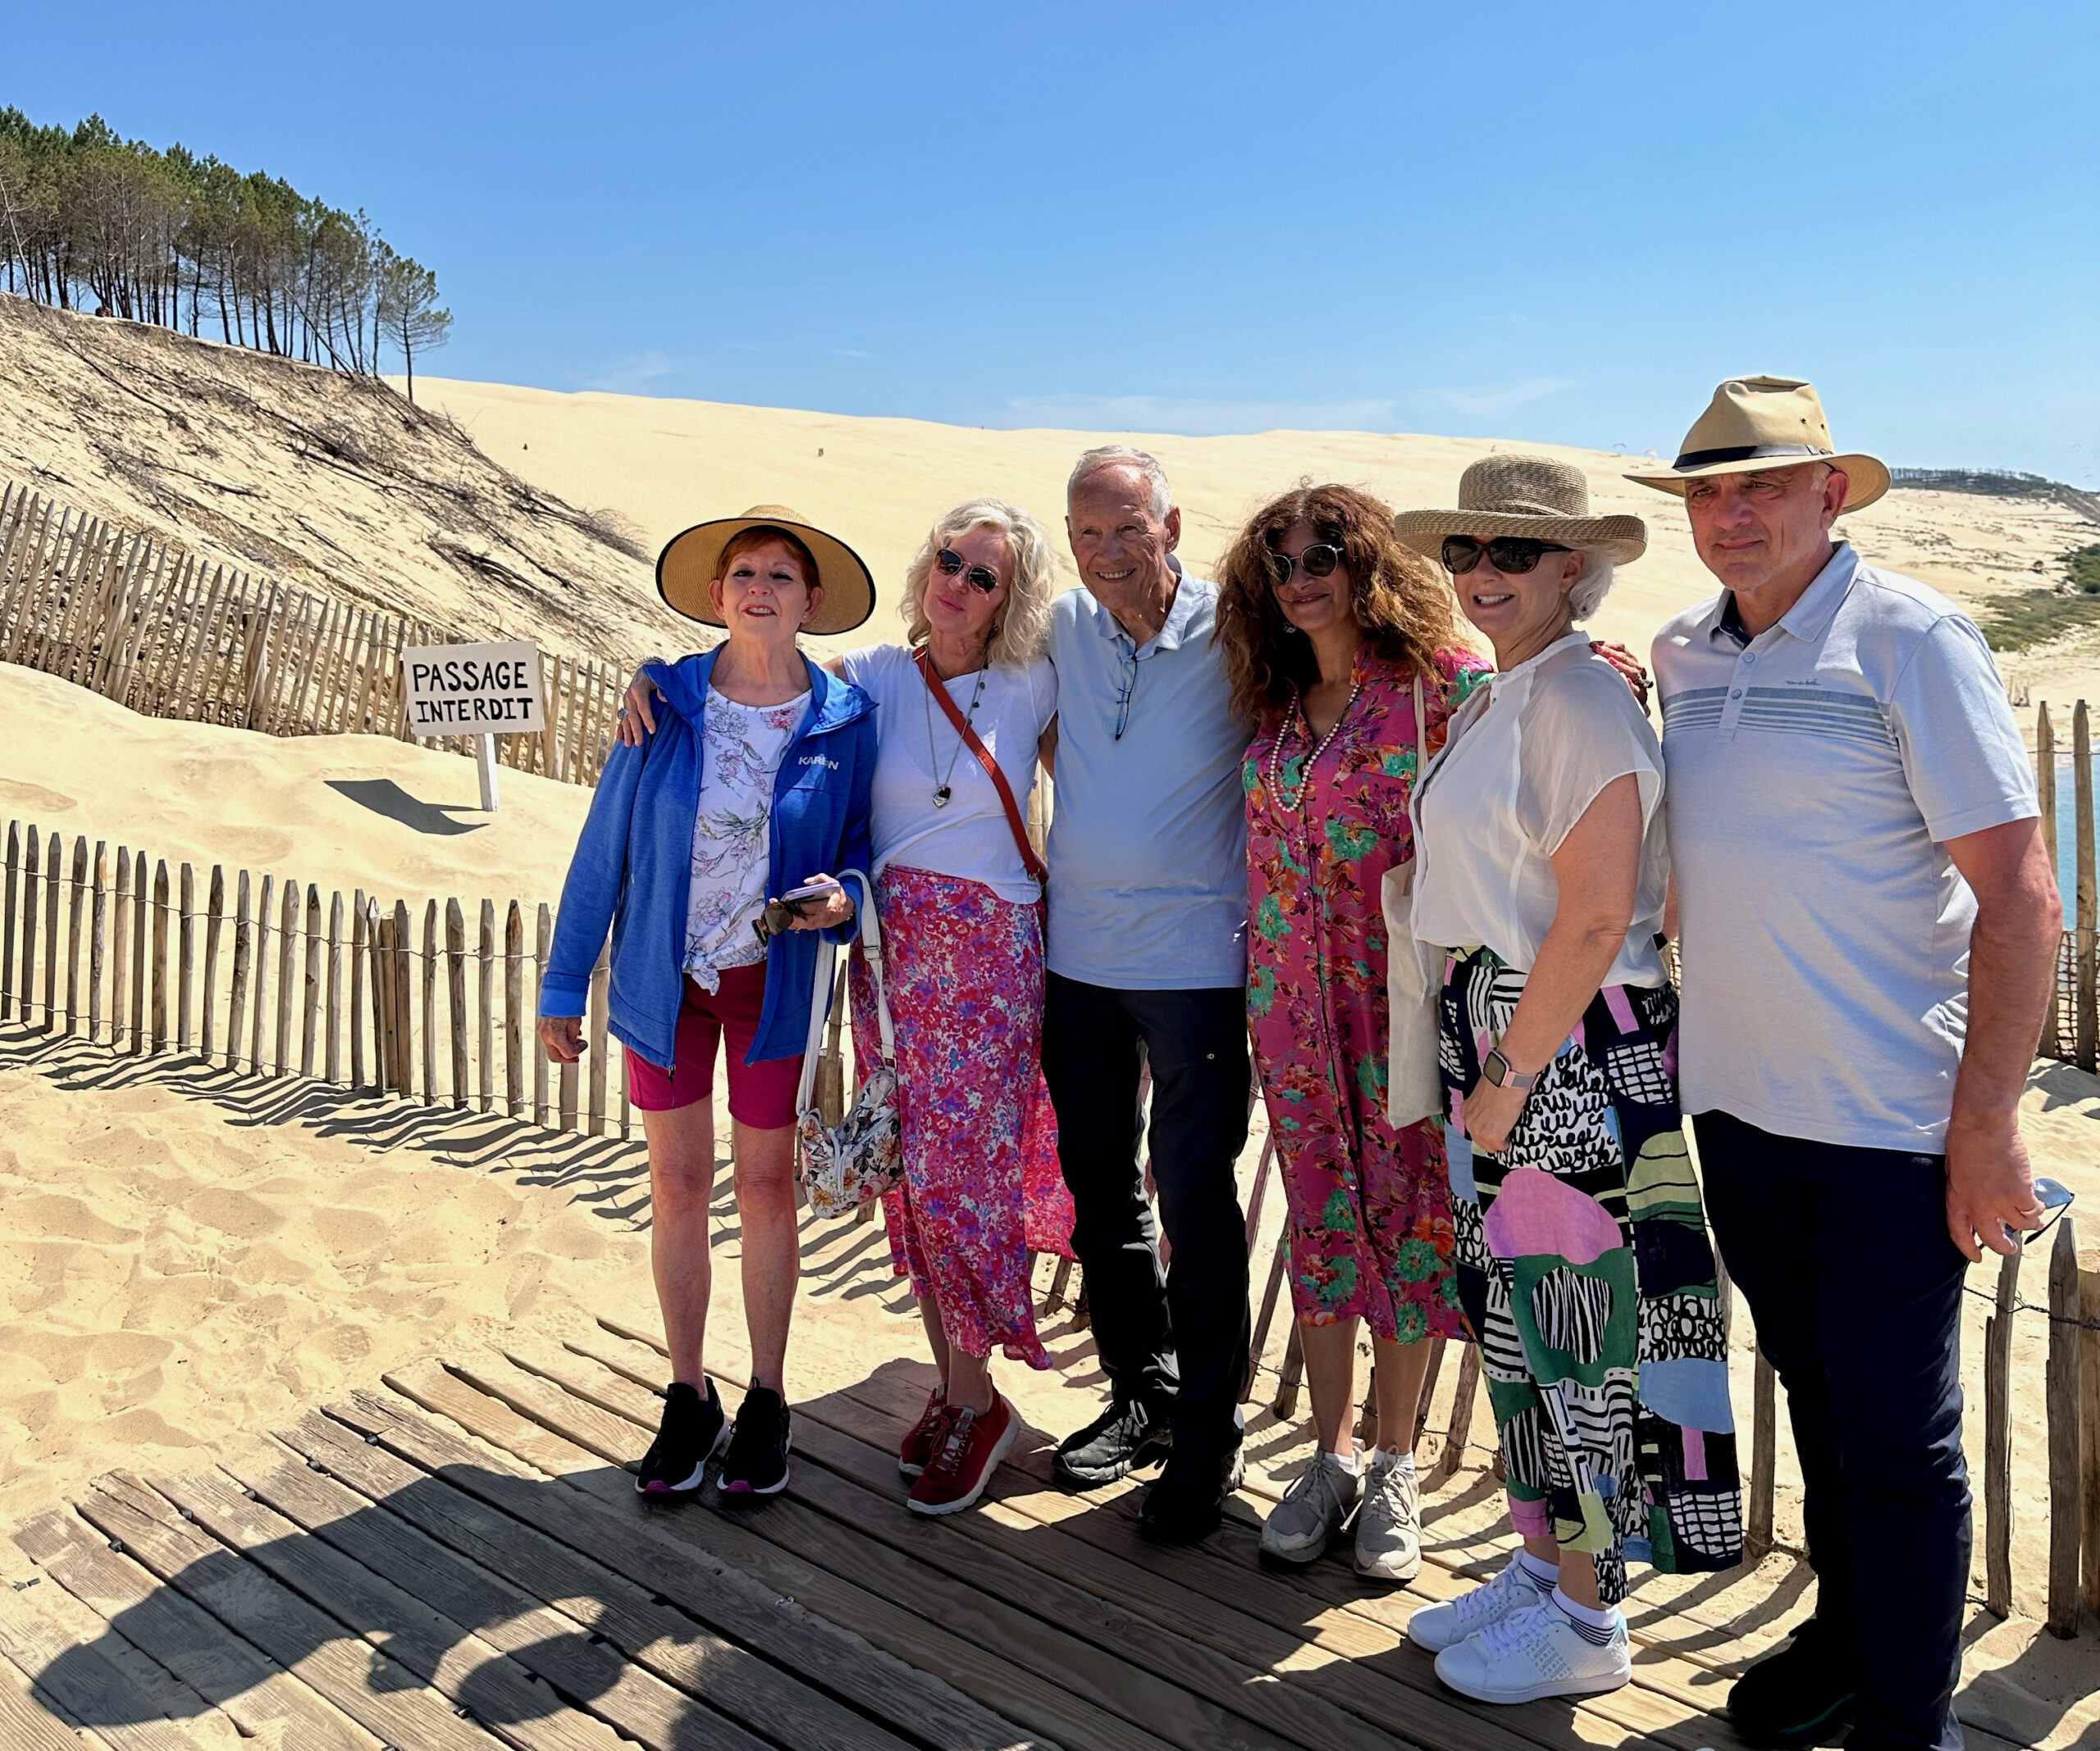 Bordeaux tour guests with Christy and team in Arcachon on tour.